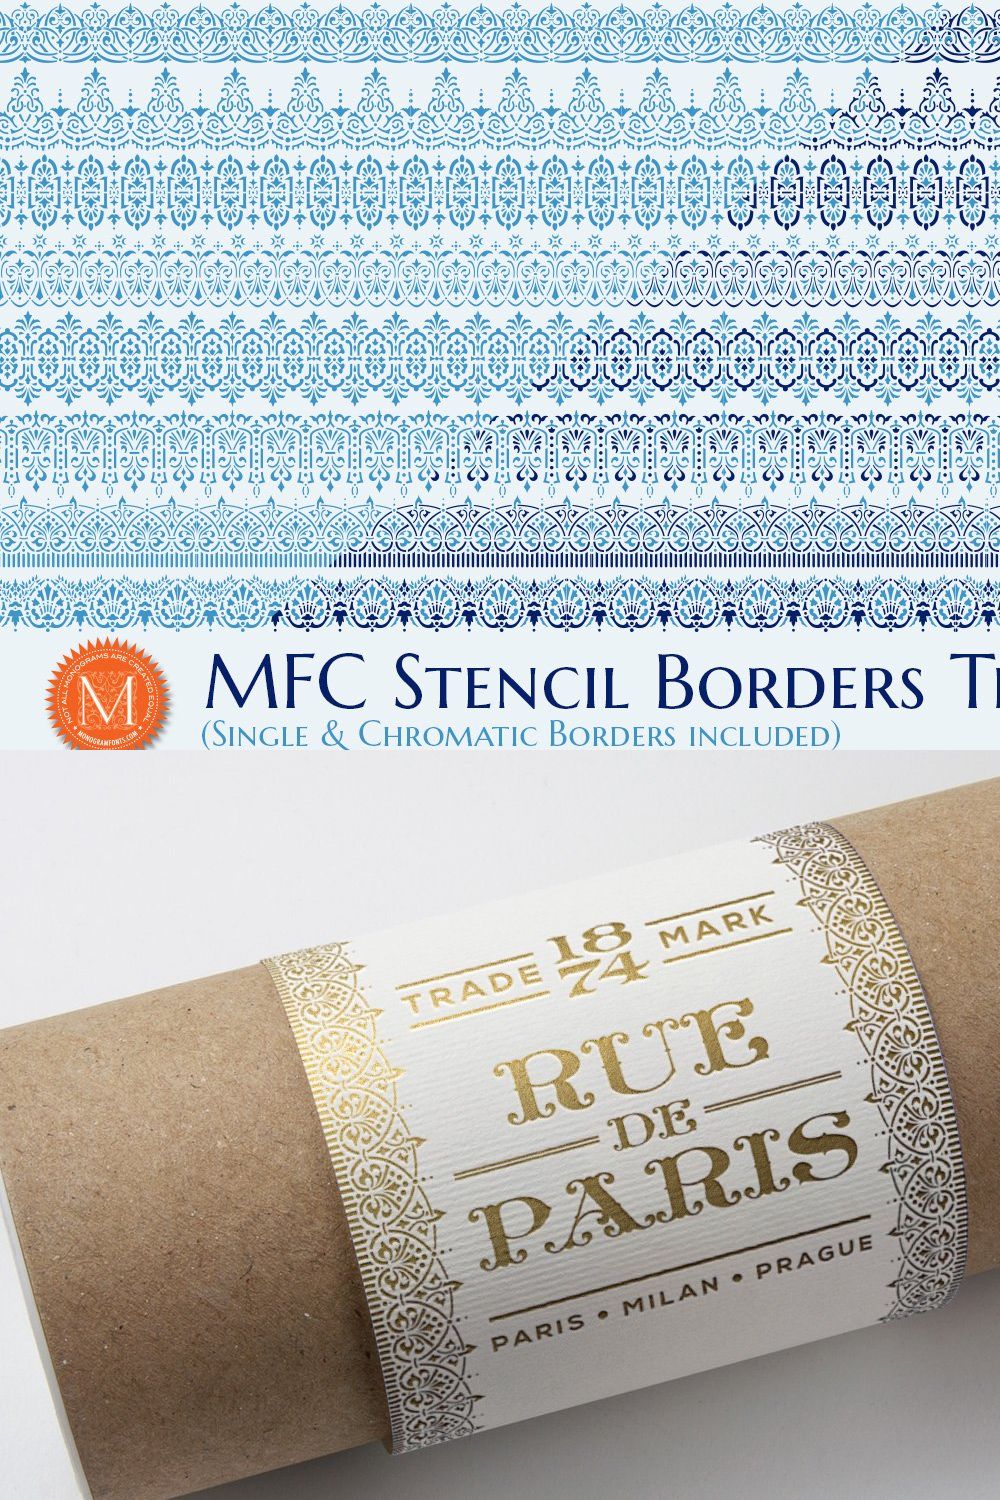 MFC Stencil Borders Three pinterest preview image.